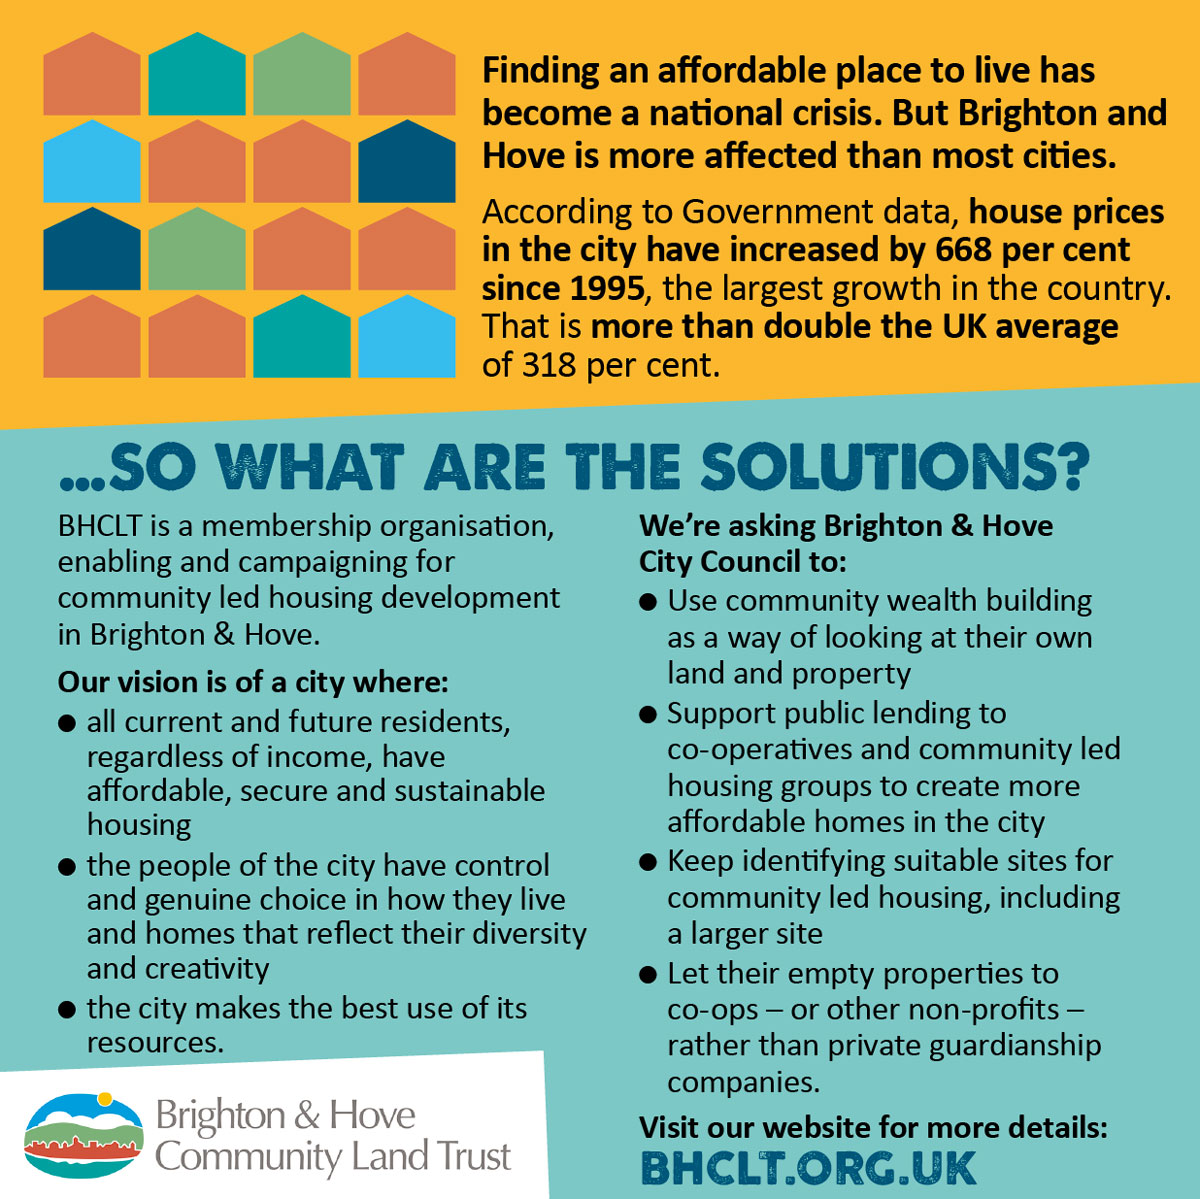 As part of the run up to local elections in May, we've developed an 'ask' for parties to sign up to, to progress community led housing in the city. Come along to our hustings on 13th April to find out how they're responding and to ask your questions. bhclt.org.uk/come-to-our-hu…